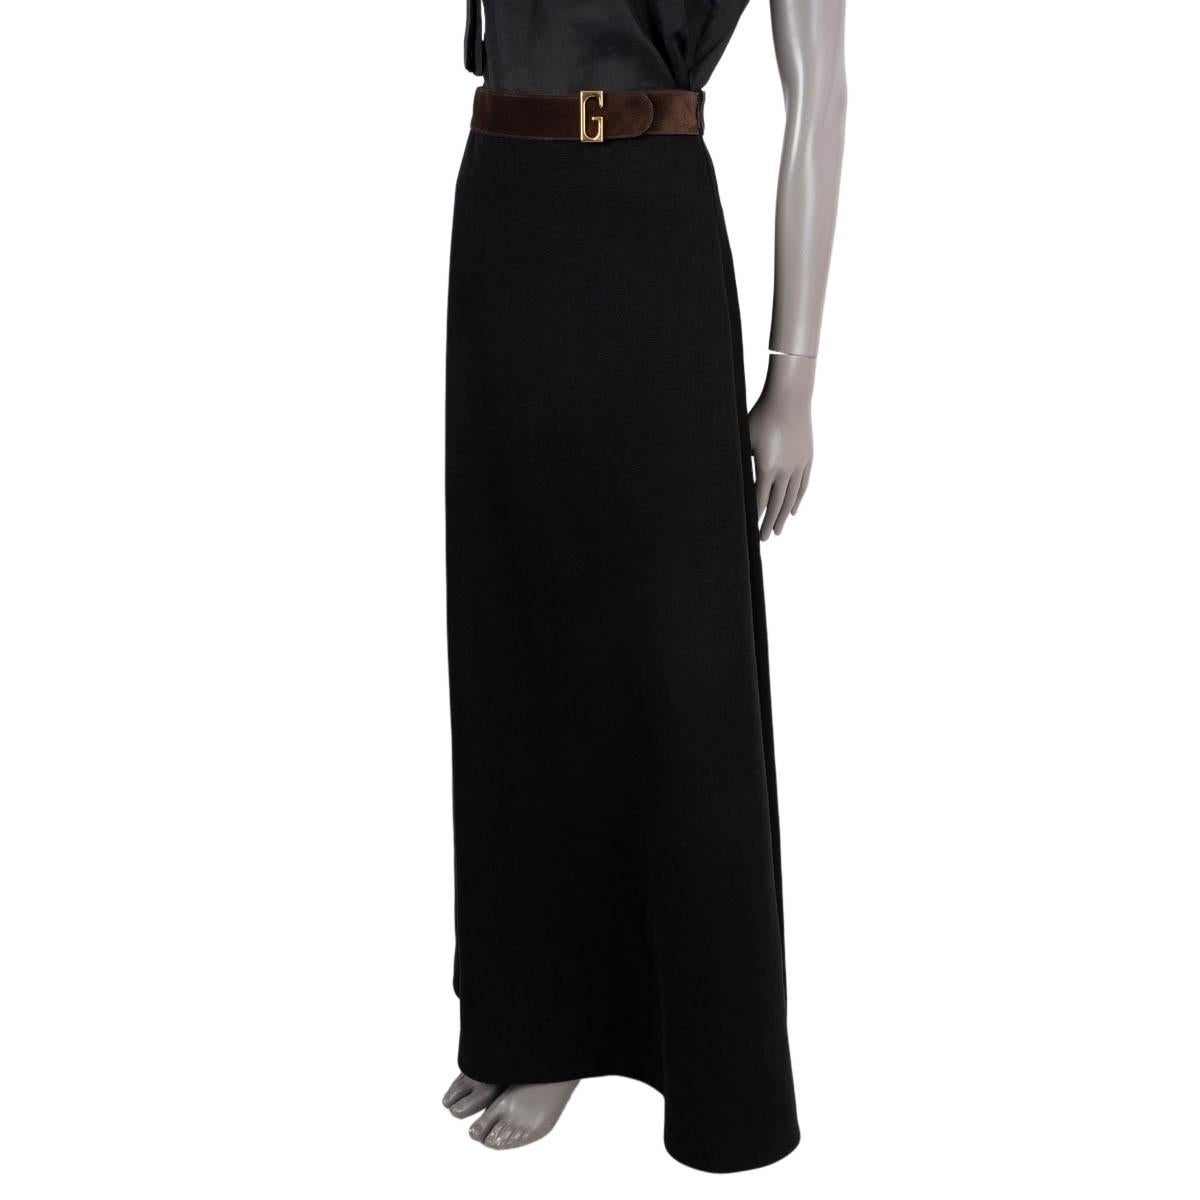 100% authentic Gucci flared maxi skirt in black linend (100%). The design features a a brown suede leather waistband with gold-tone metal G buckle. Unlined. Opens with a zipper on the side. Brand new with tags. 

2017 Fall/Winter

Measurements
Tag